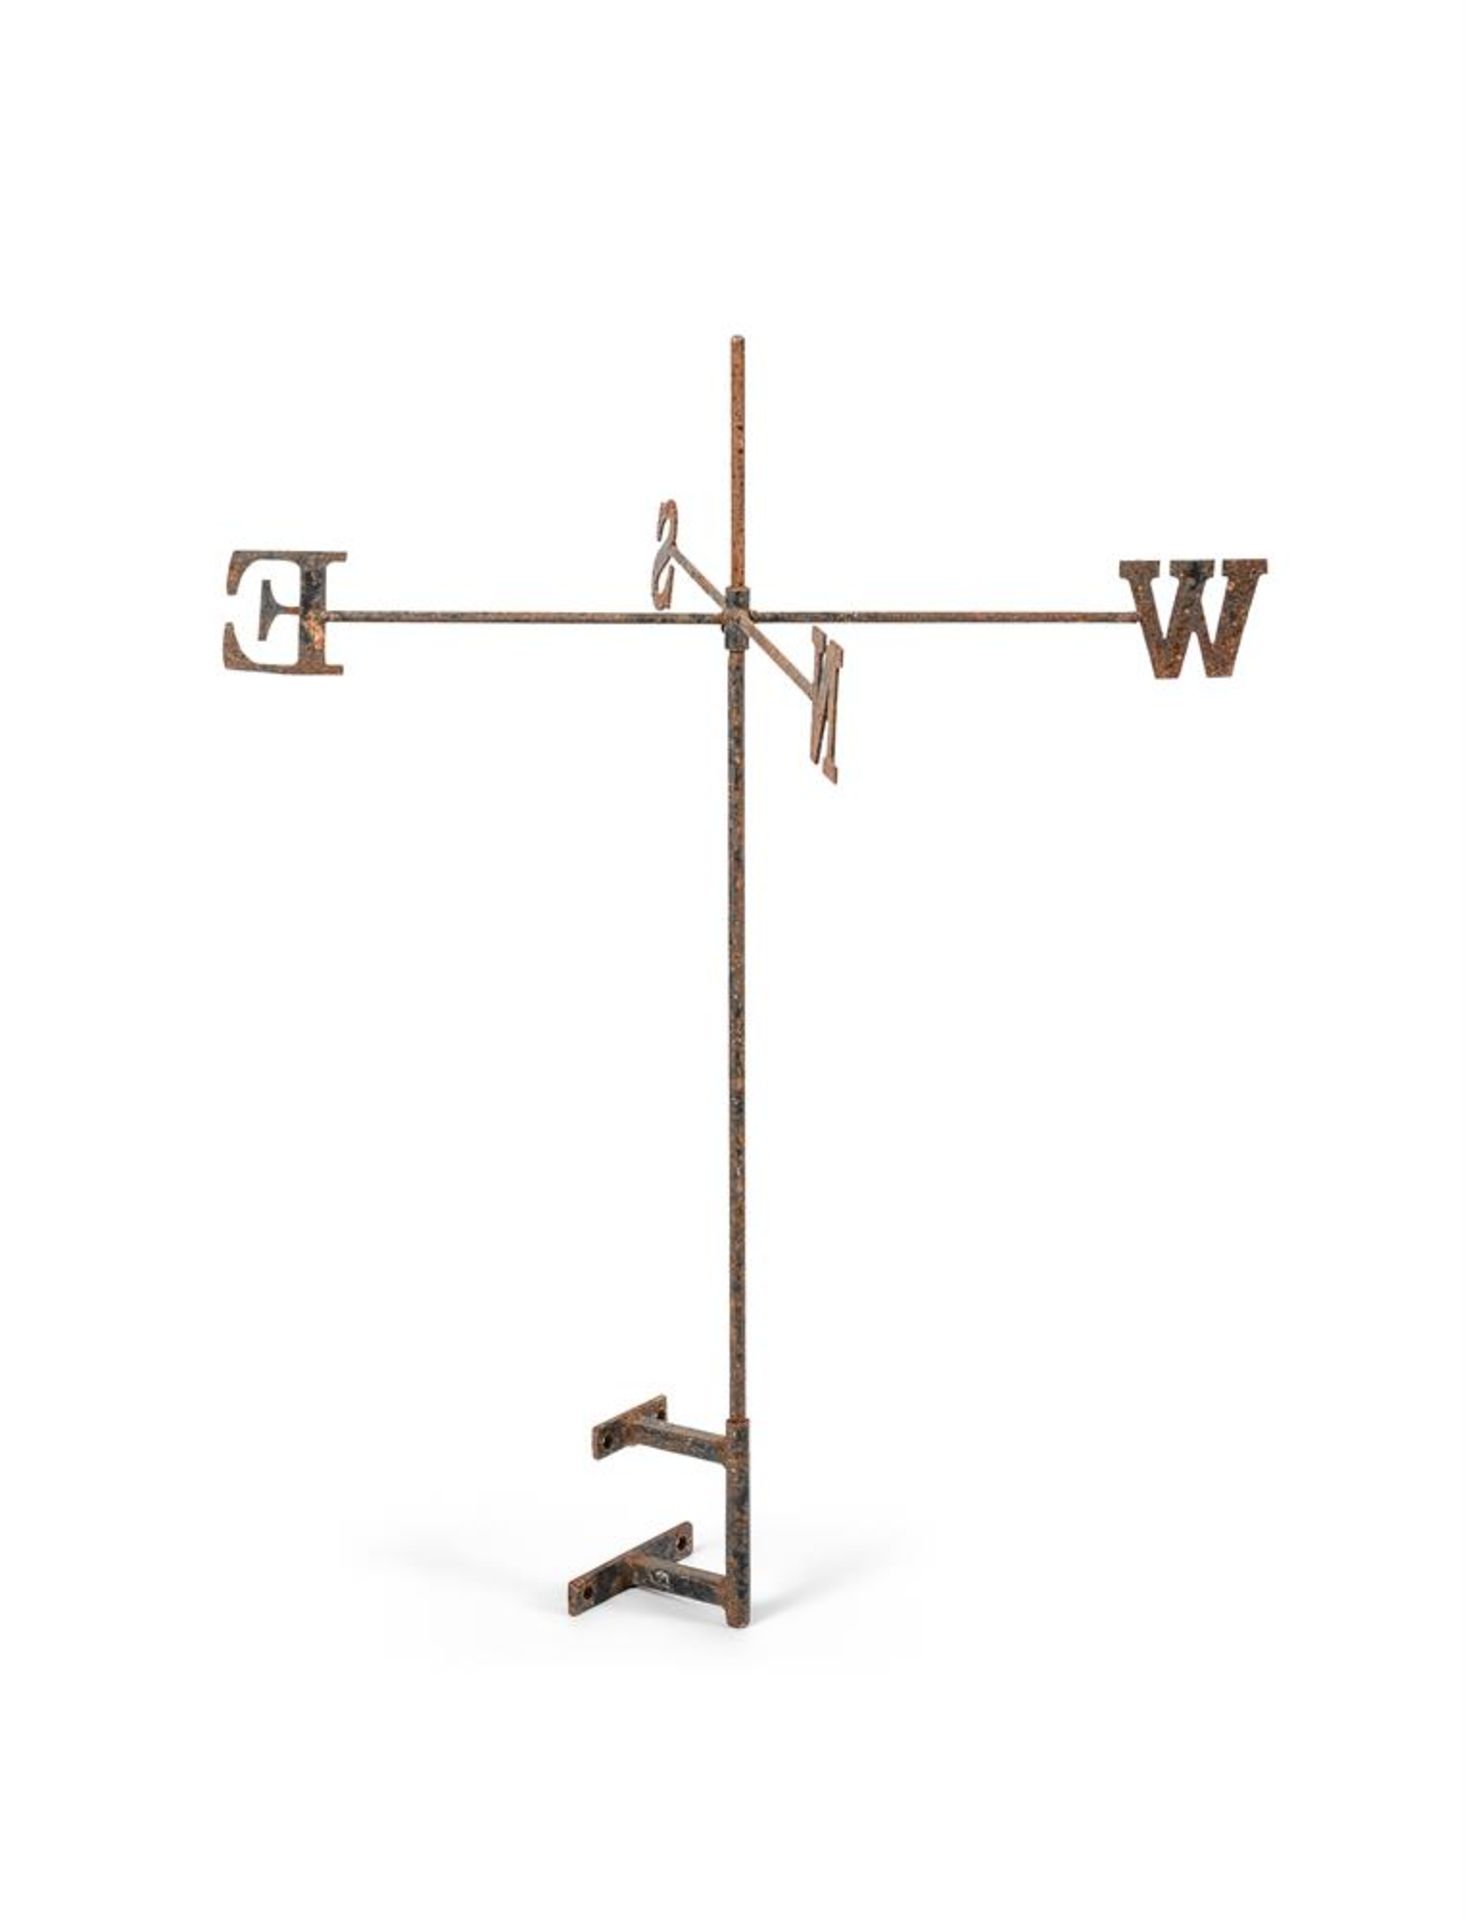 ASSORTED GARDEN METALWORK TO INCLUDE: VICTORIAN LAWN EDGING AND WEATHERVANE - Image 2 of 2